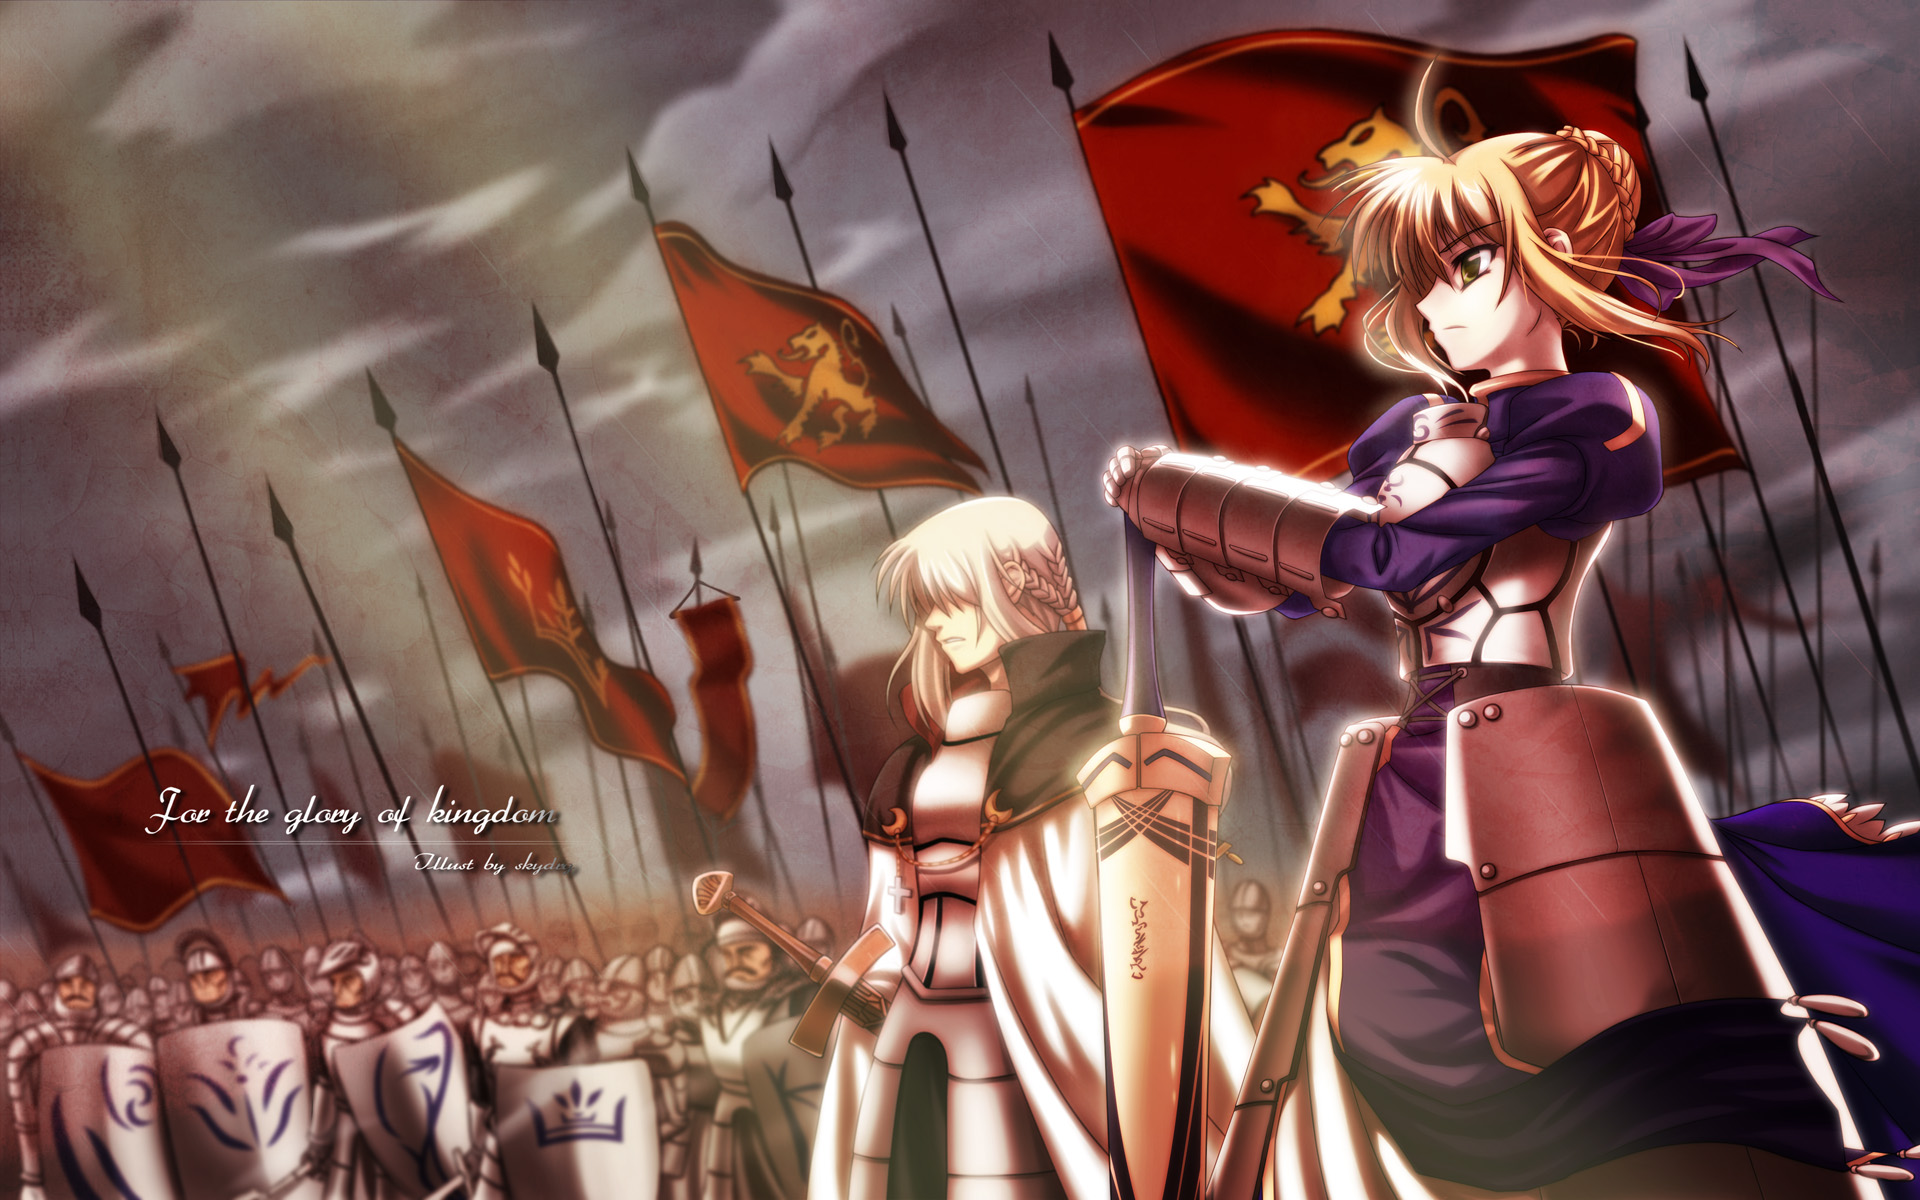 Saber from Fate/Zero in a stunning anime artwork.